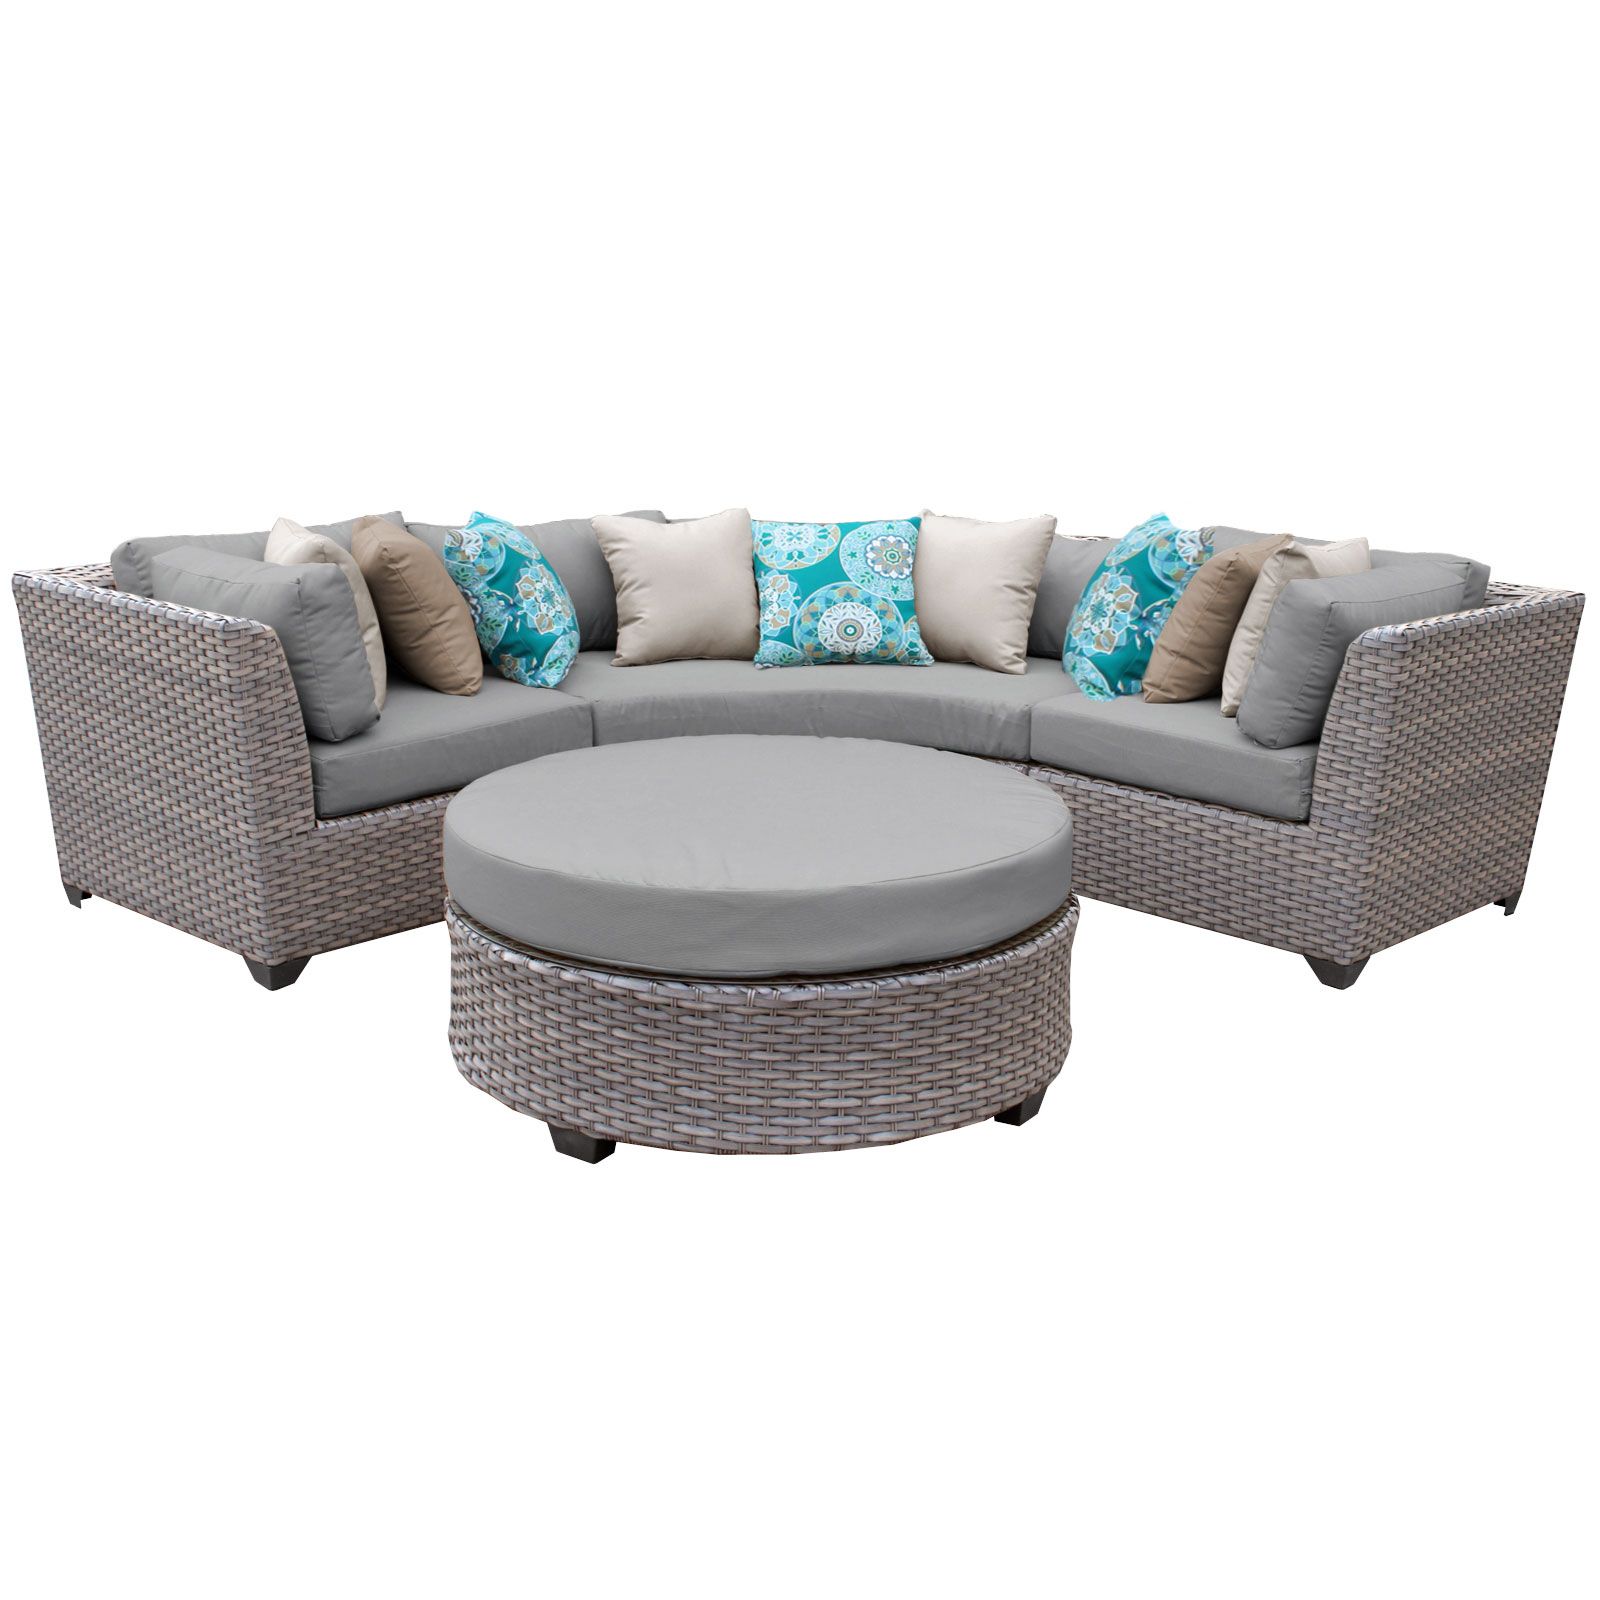 Catalina 4 Piece Outdoor Wicker Patio Furniture Set 04a – Walmart With Most Up To Date 4 Piece Outdoor Wicker Seating Sets (View 14 of 15)